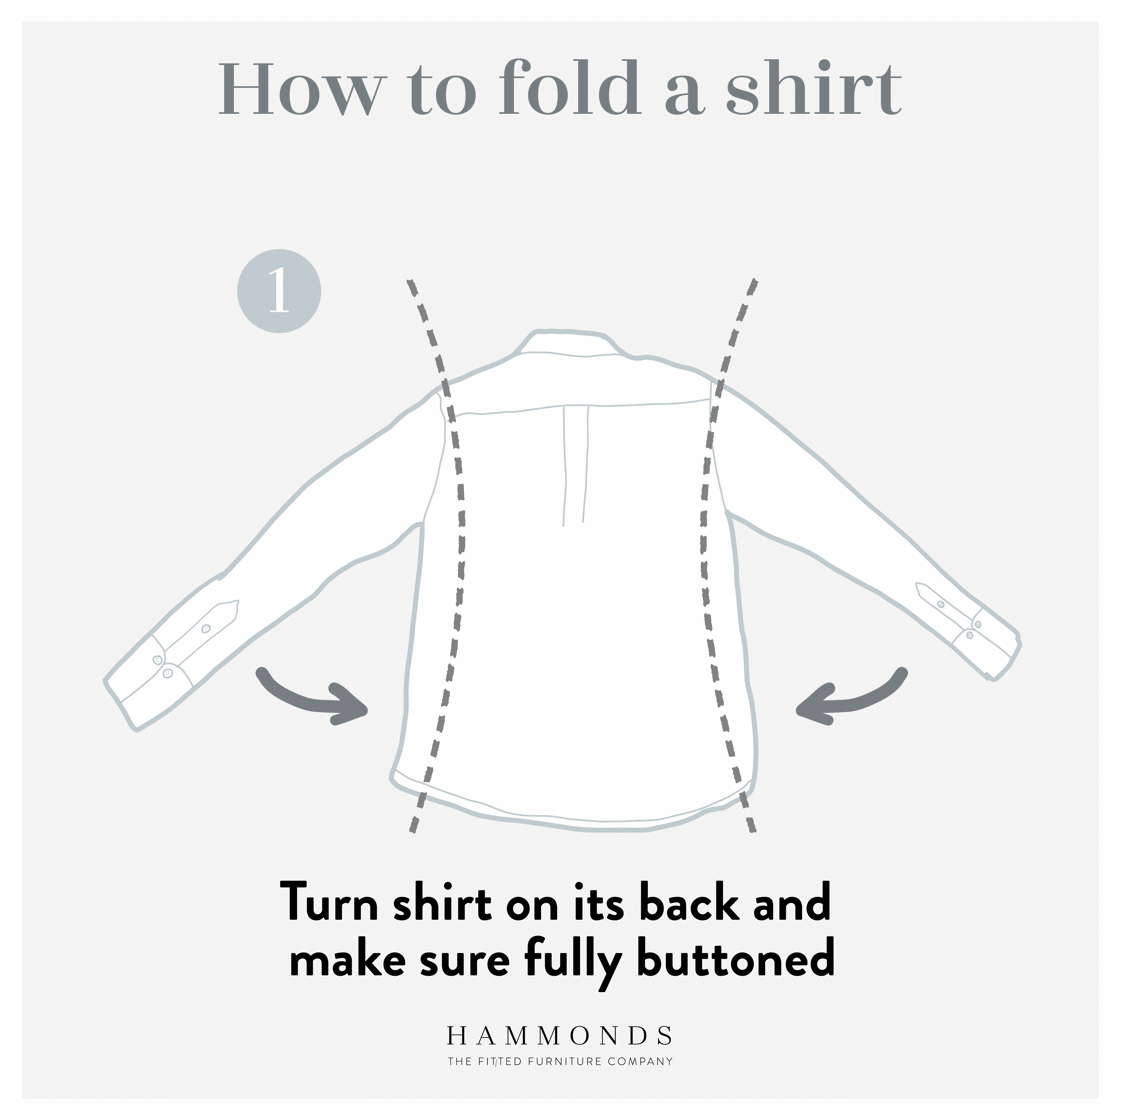 How to Fold a Button-Up Shirt Three Ways